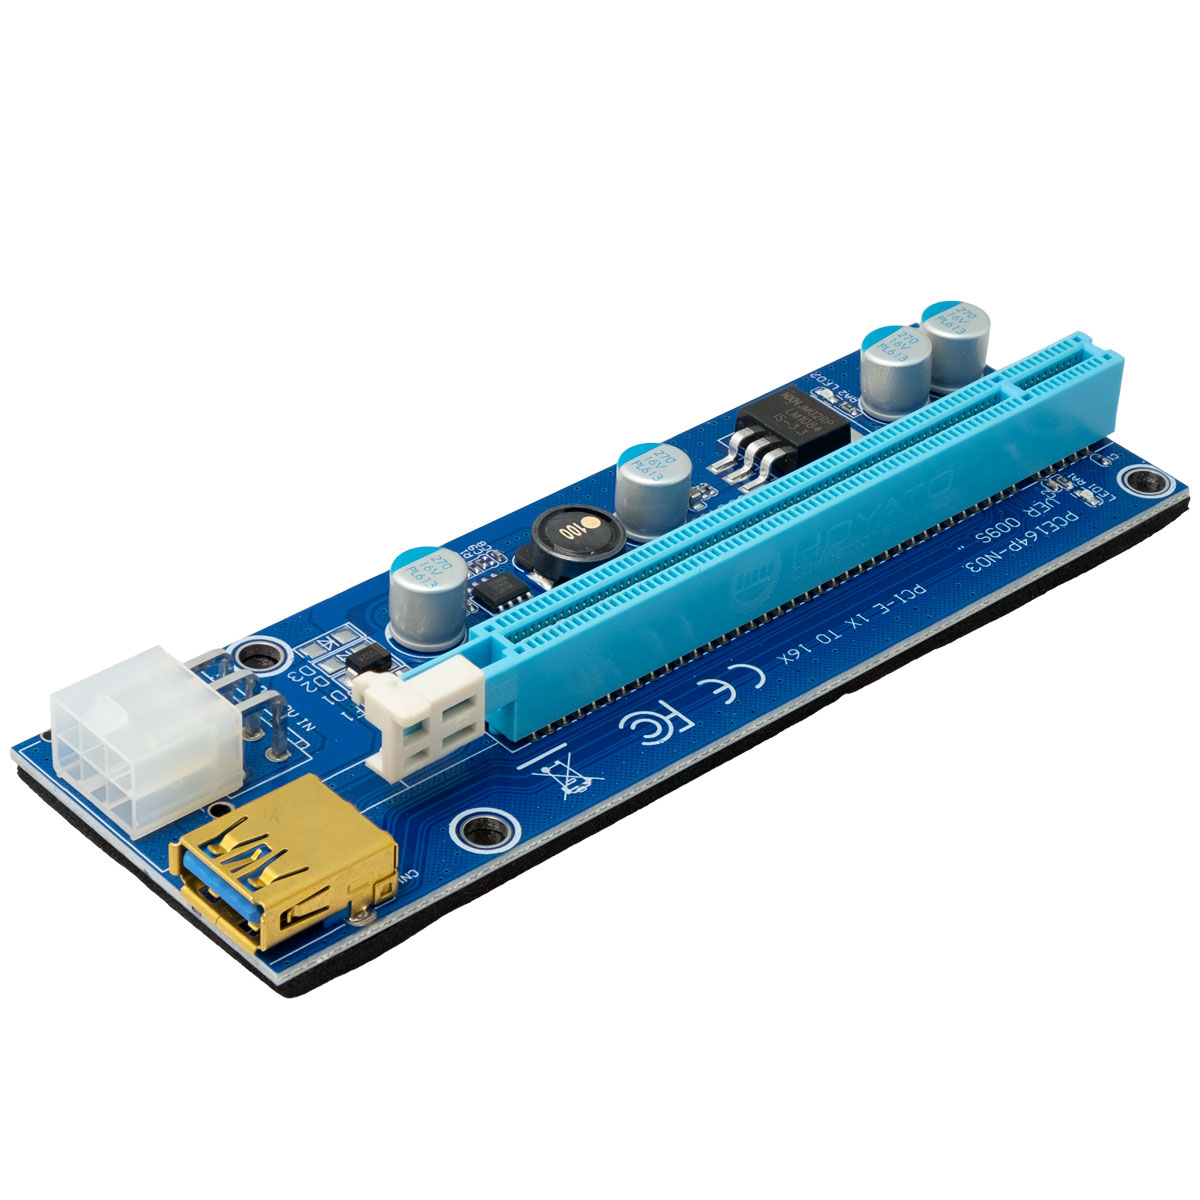 RISER board PCI-Ex16 version 009S pack for cryptocurrency mining